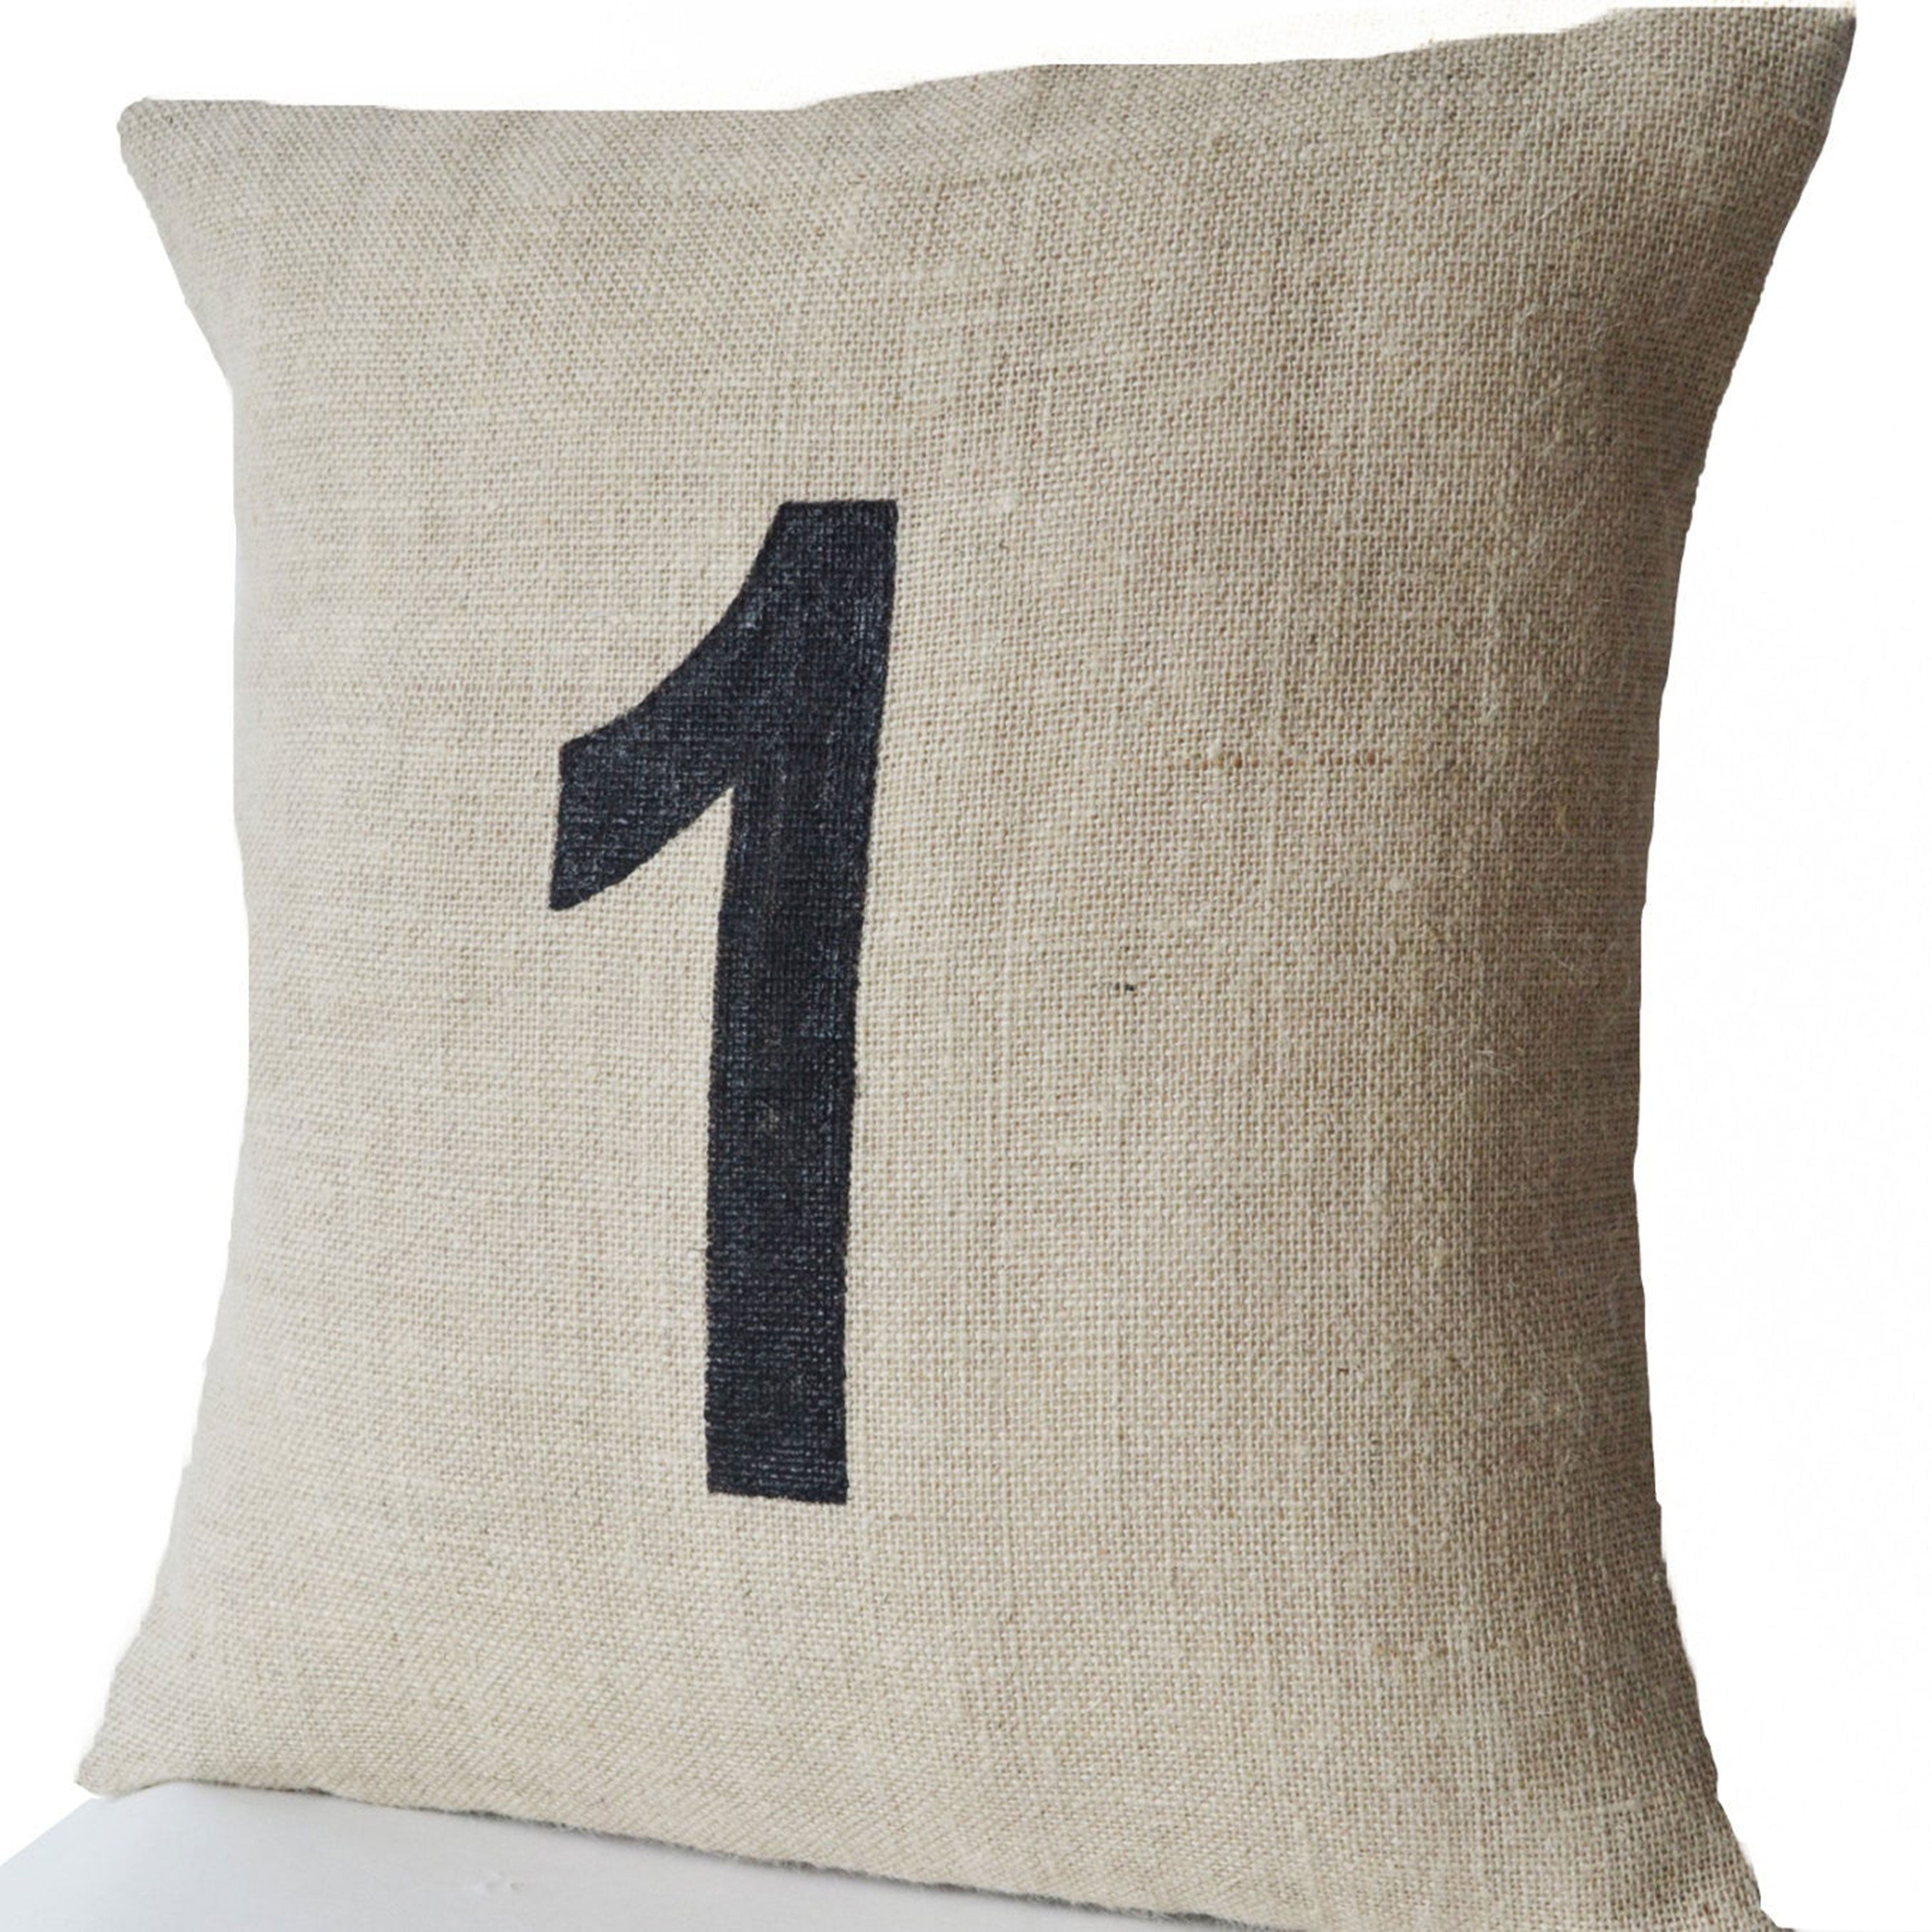 Burlap Number Pillows Customized Hand Painted Numeric Pillows Personalized Dorm Cushion